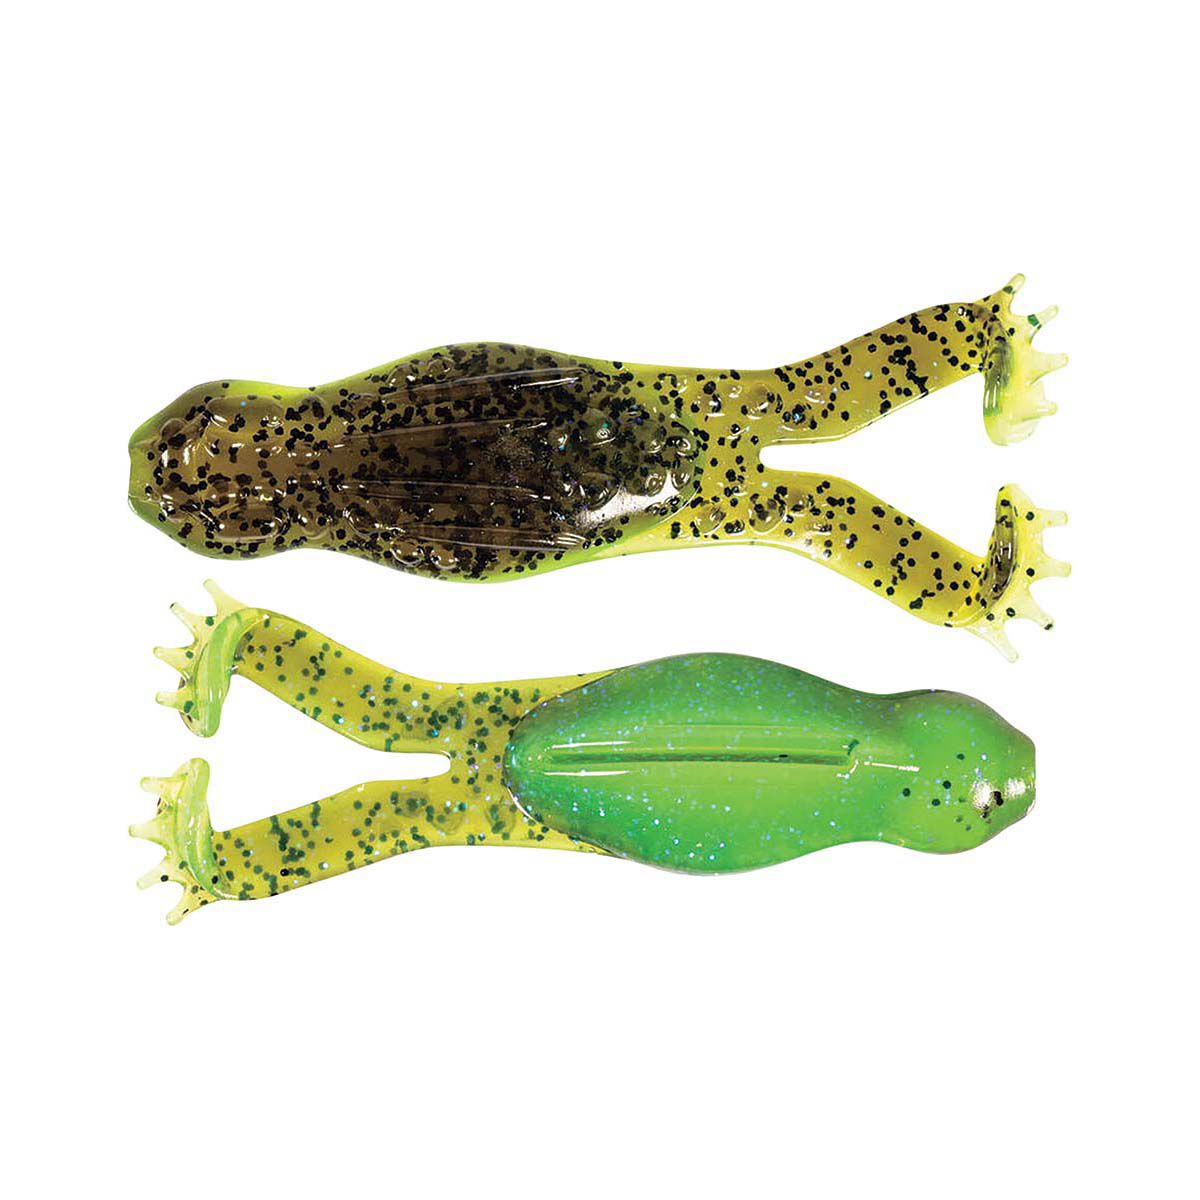 Zman Lure Goat Toadz Weedless Soft Plastic Lure 4in Hot Snakes